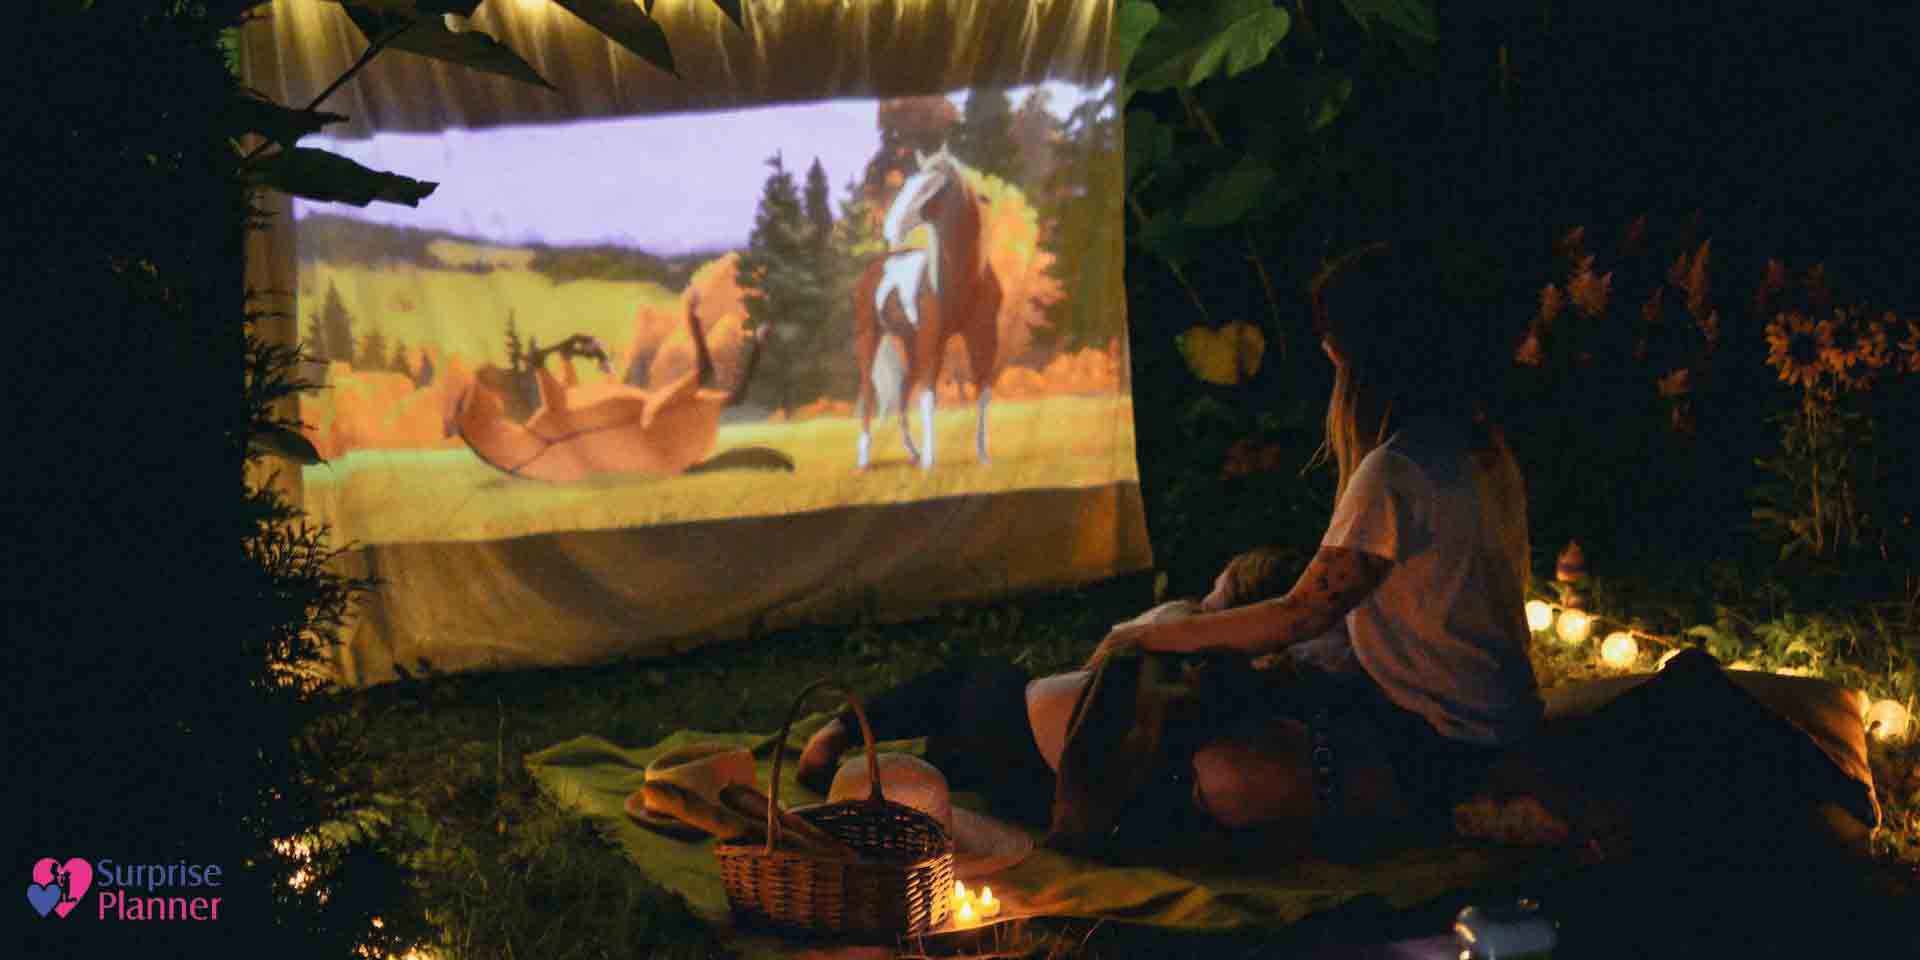 Movie Date Night at Home Ideas & Activities